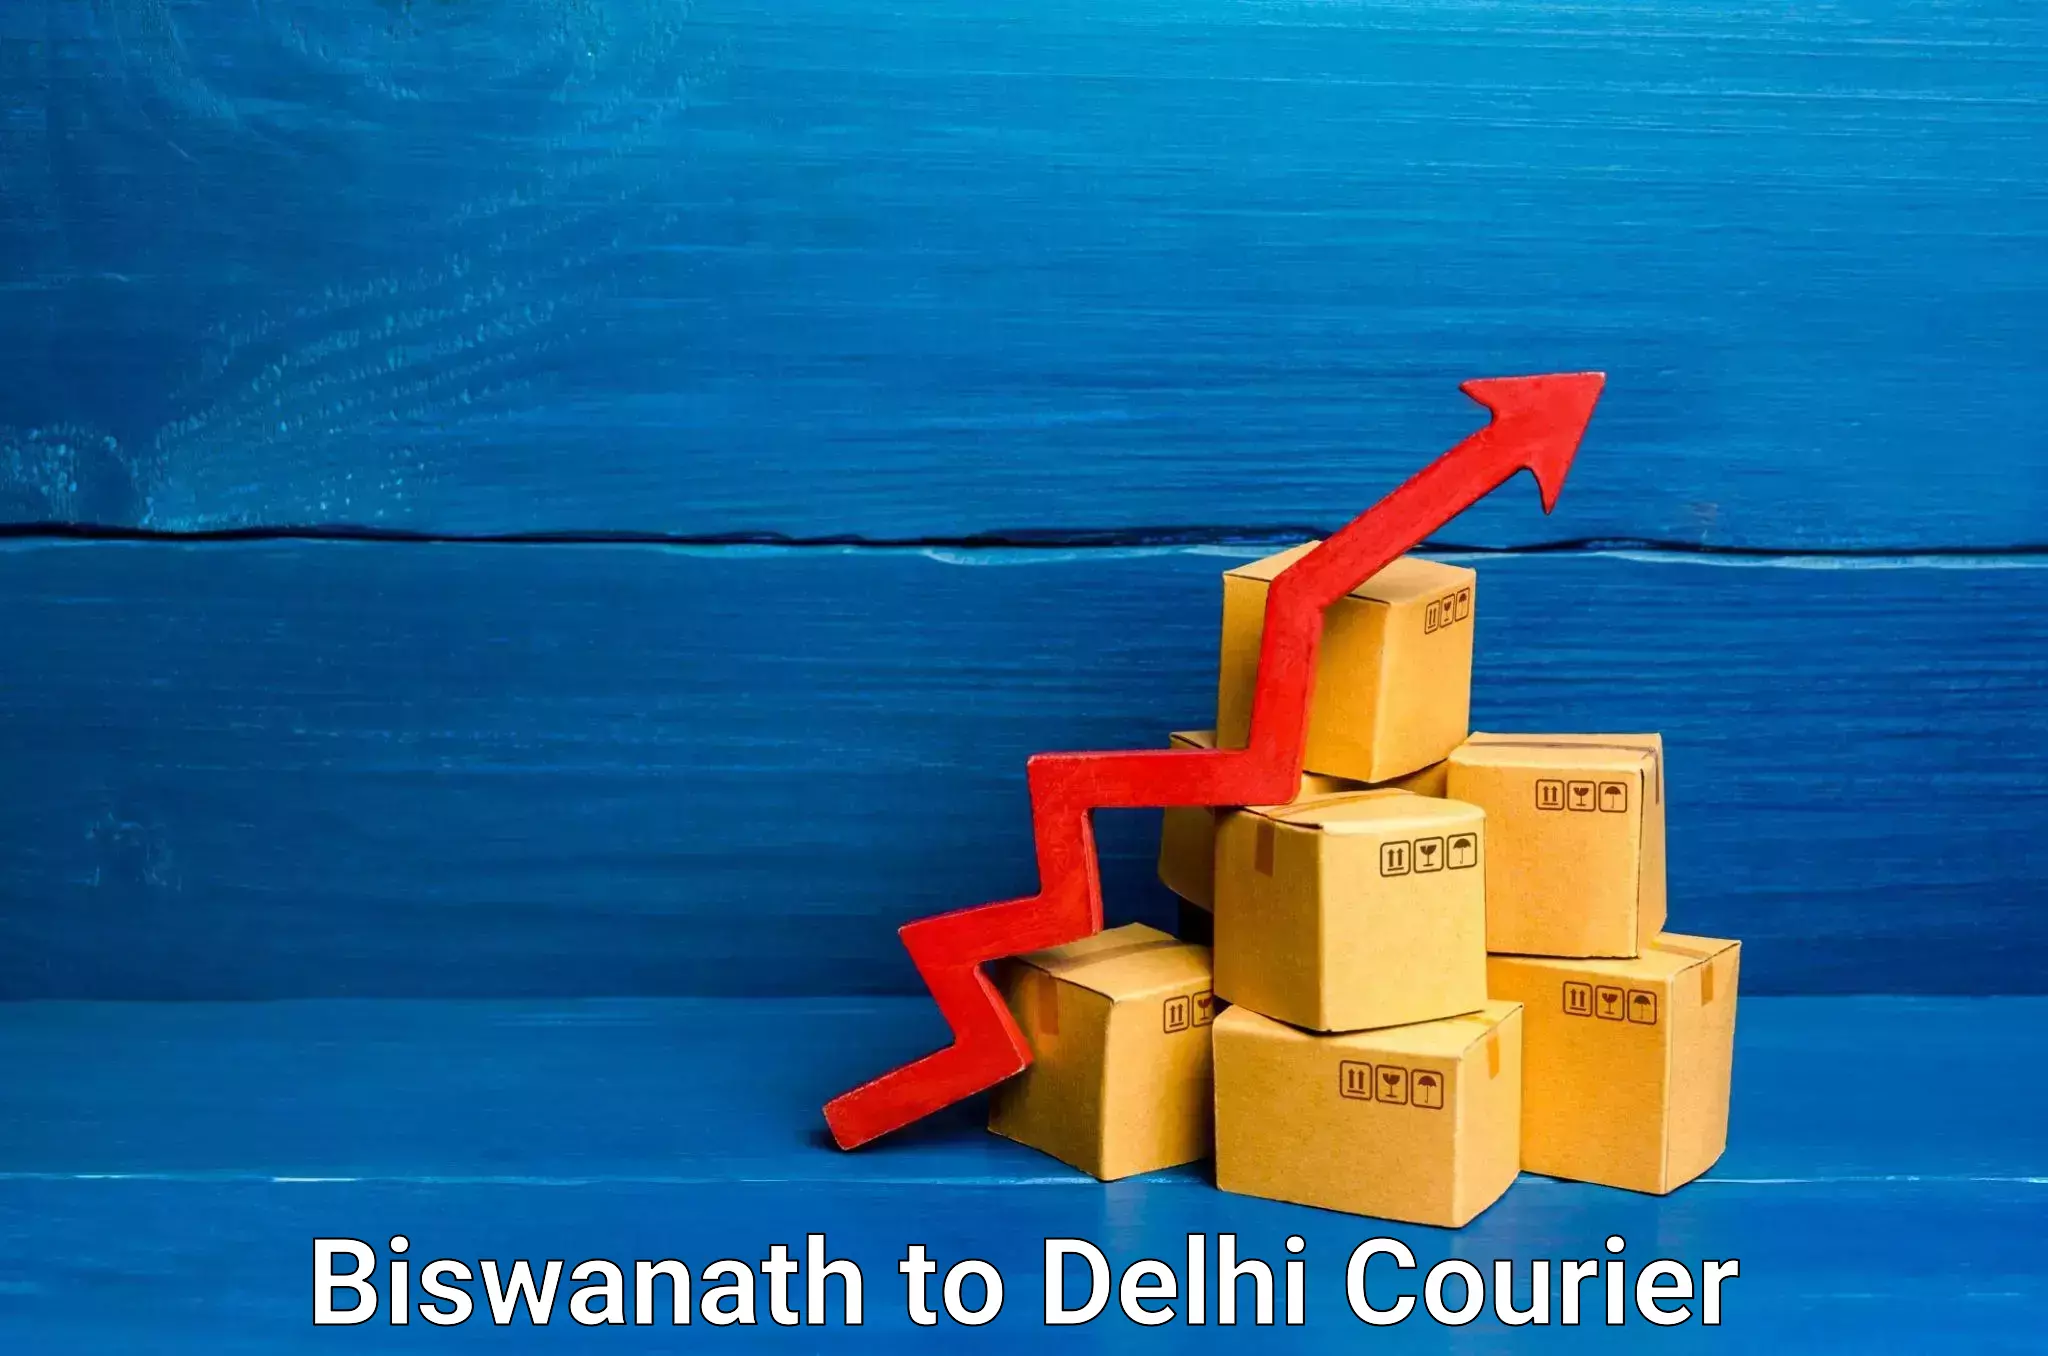 Courier service innovation Biswanath to NCR